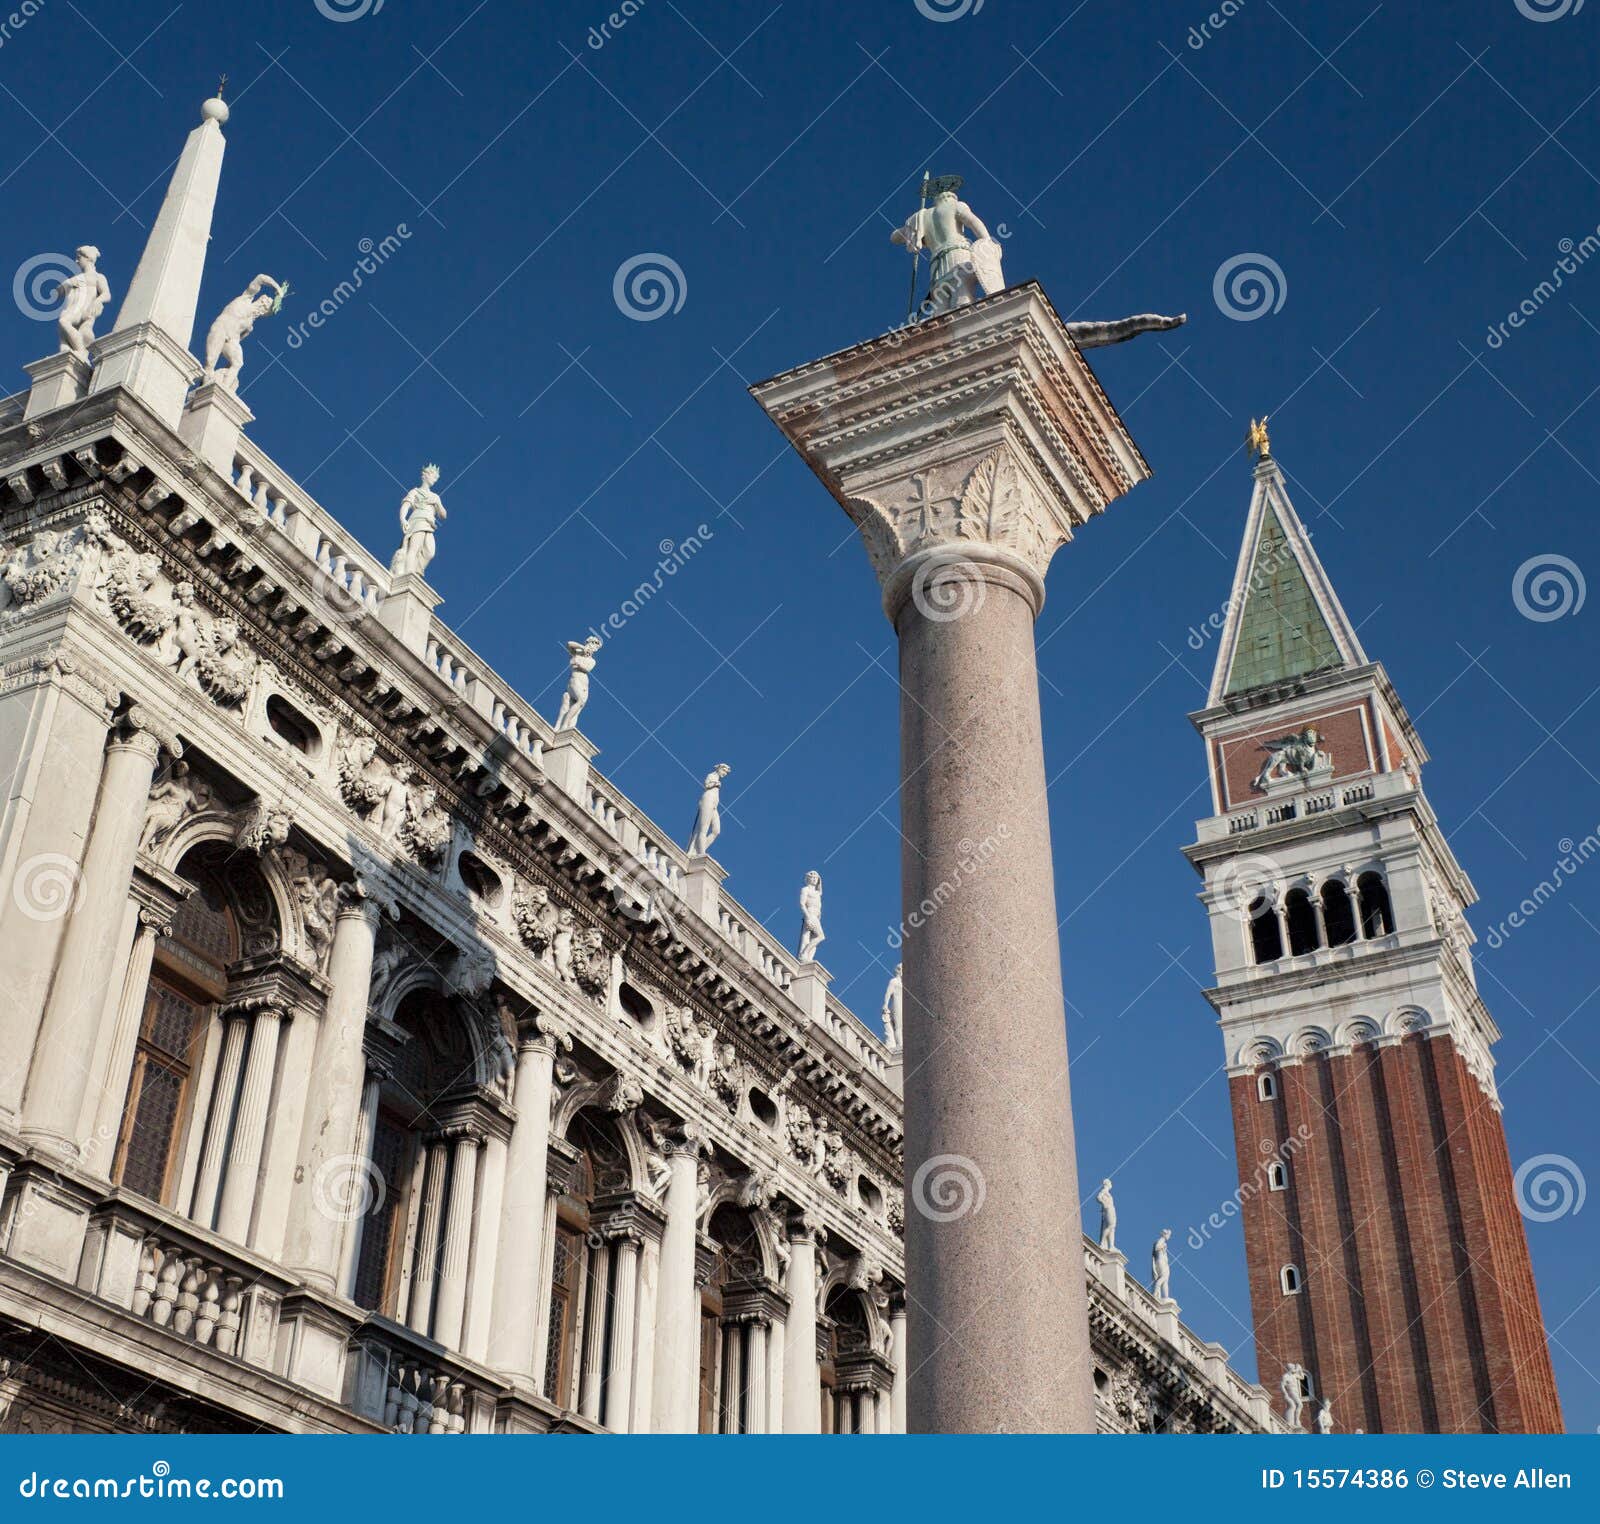 san marco and campanile in venice - italy